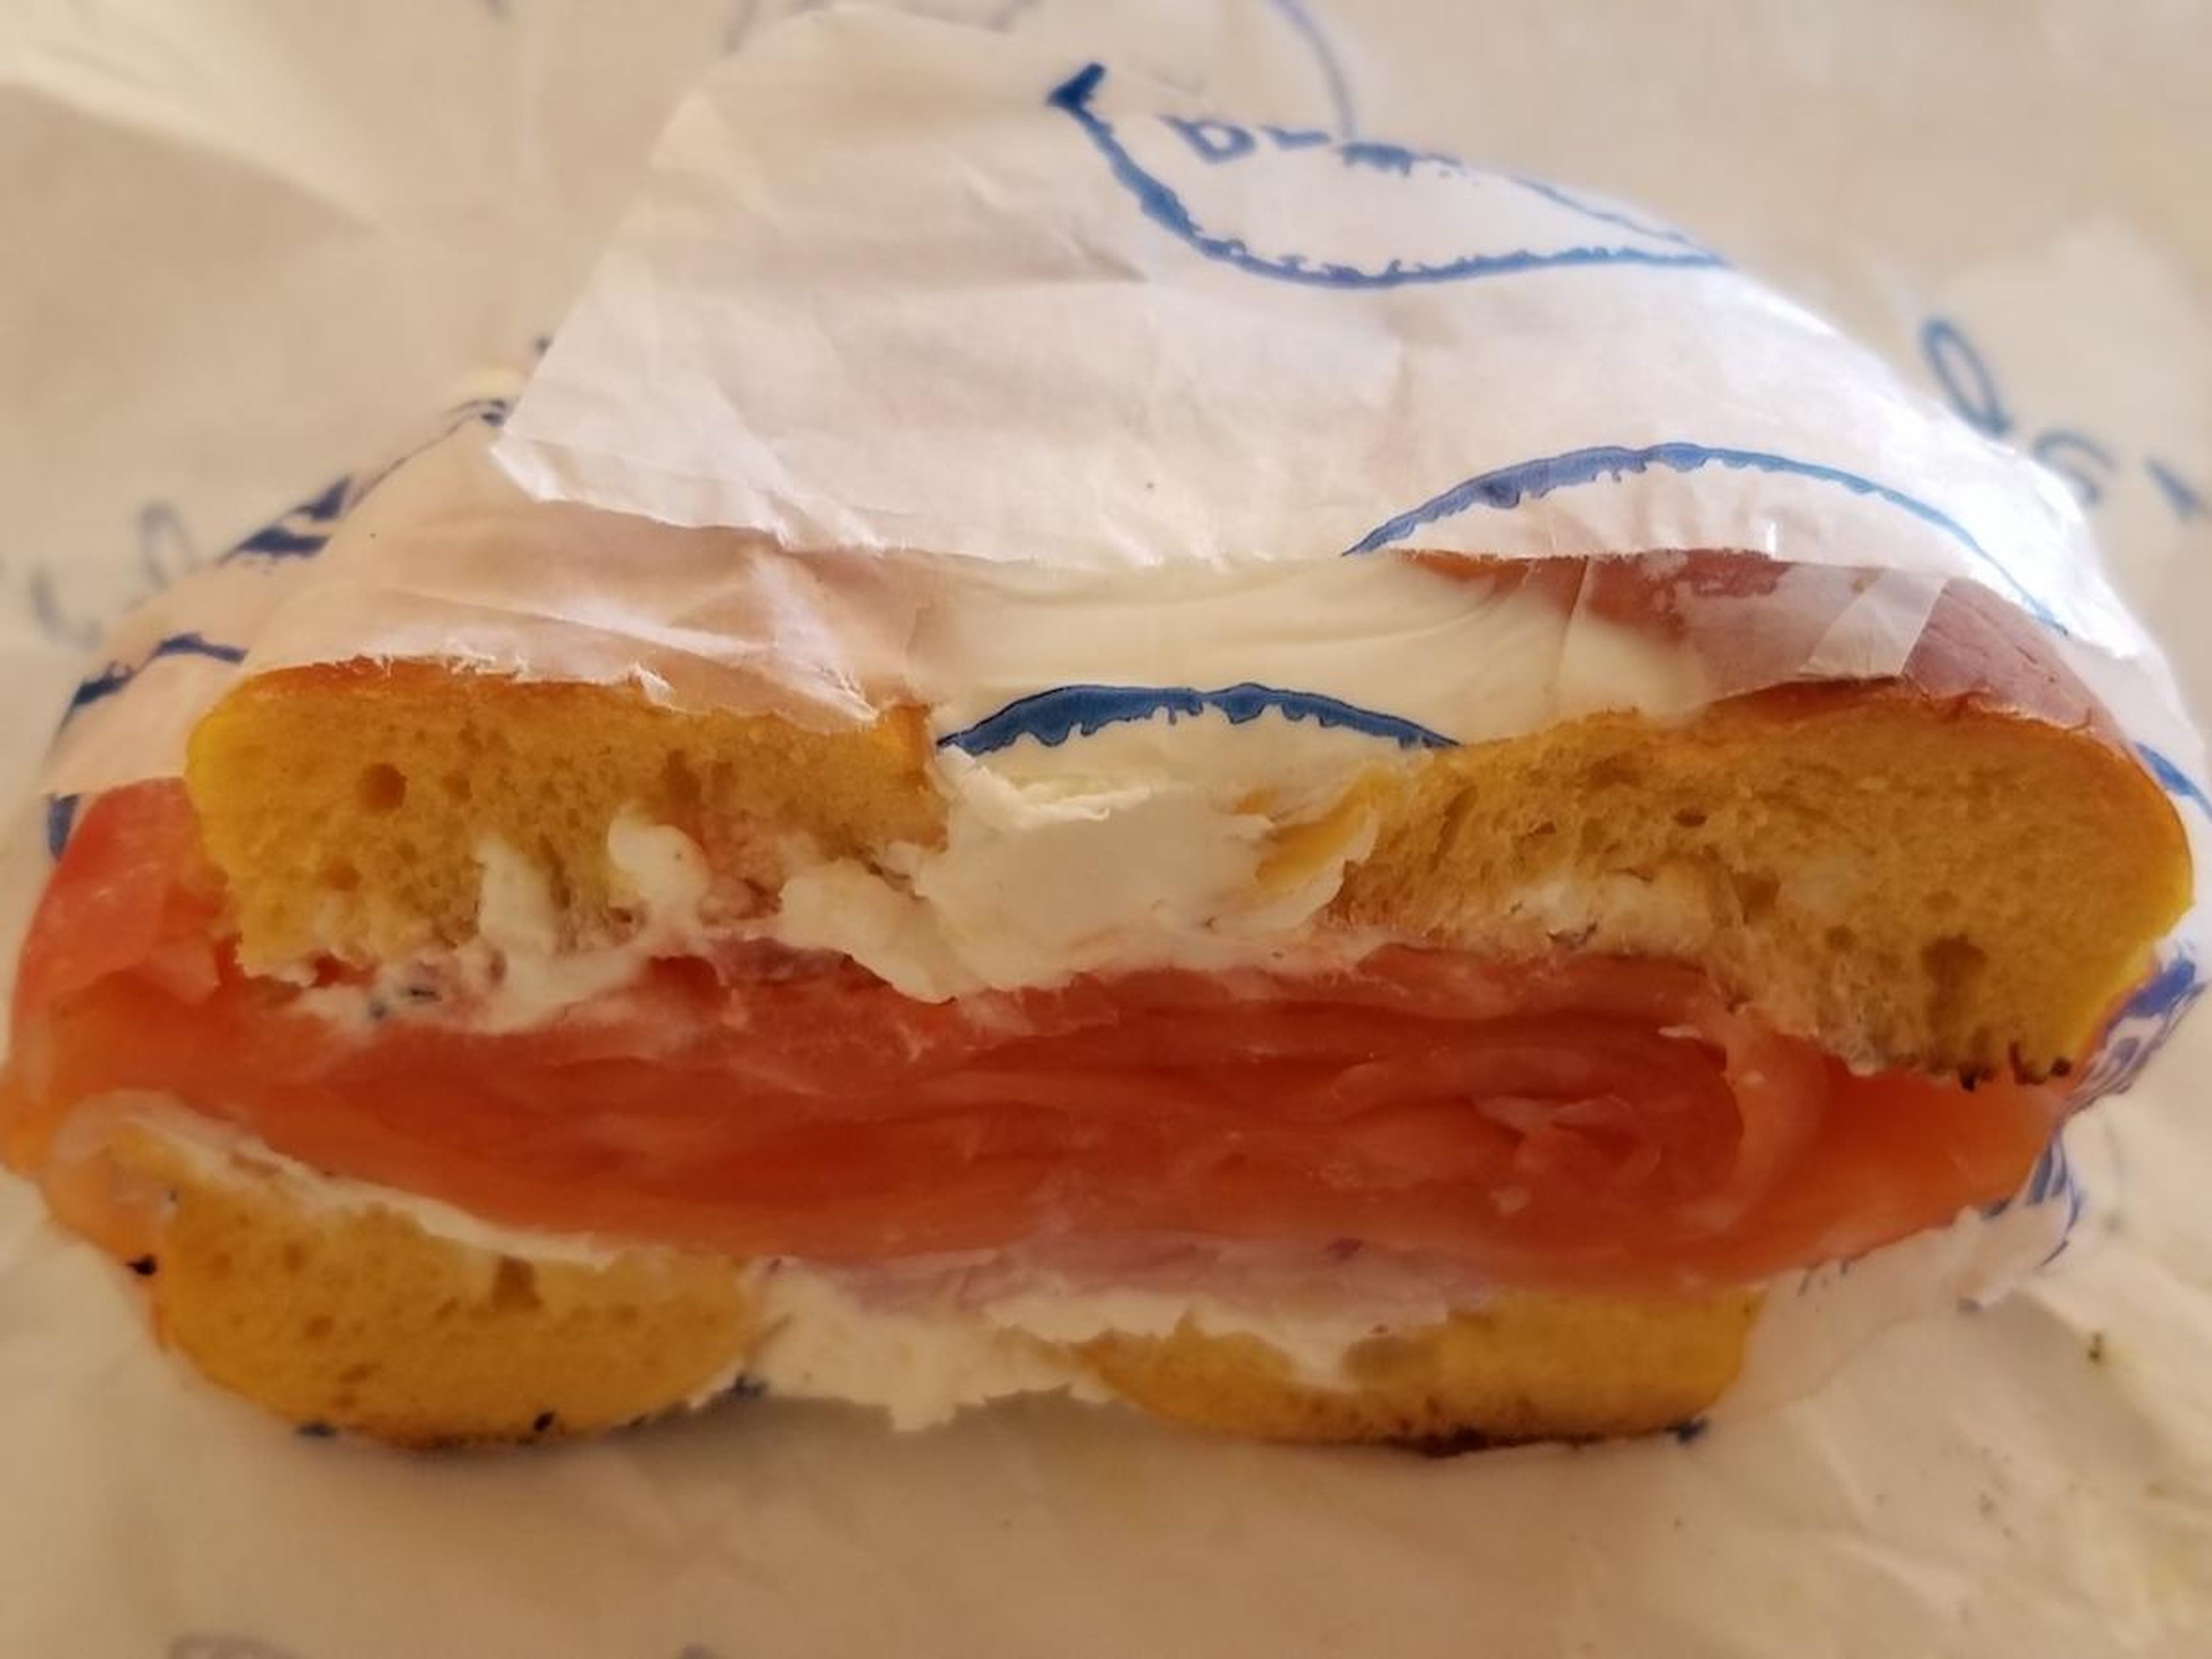 Sabatier is a fan of eggs and everything bagels. An hour after walking Walter, he grabs breakfast. Today, it's Bergen Bagels, which he says is home to "the best lox bagel in NYC."